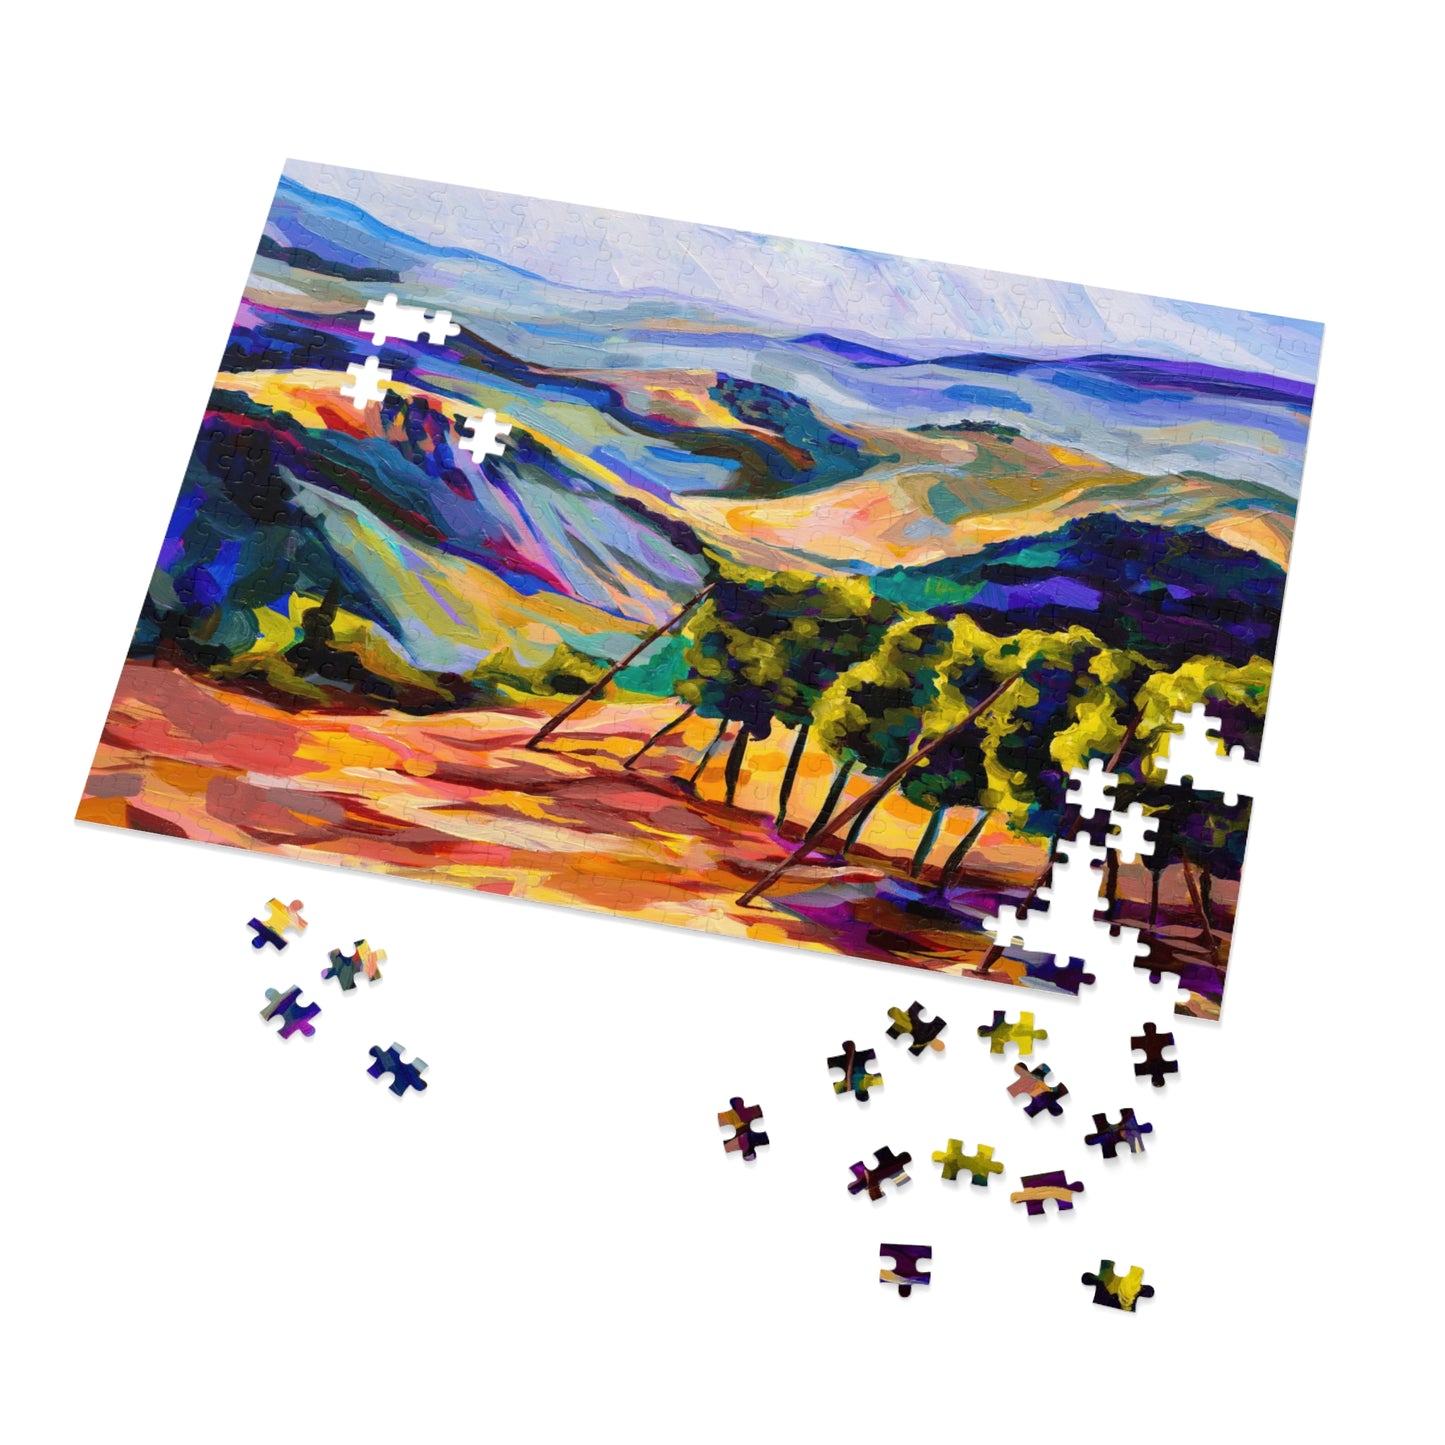 Mountaintop Vineyard Outside Jerusalem Painting by Leah Luria Jigsaw Puzzle (500 Pieces)